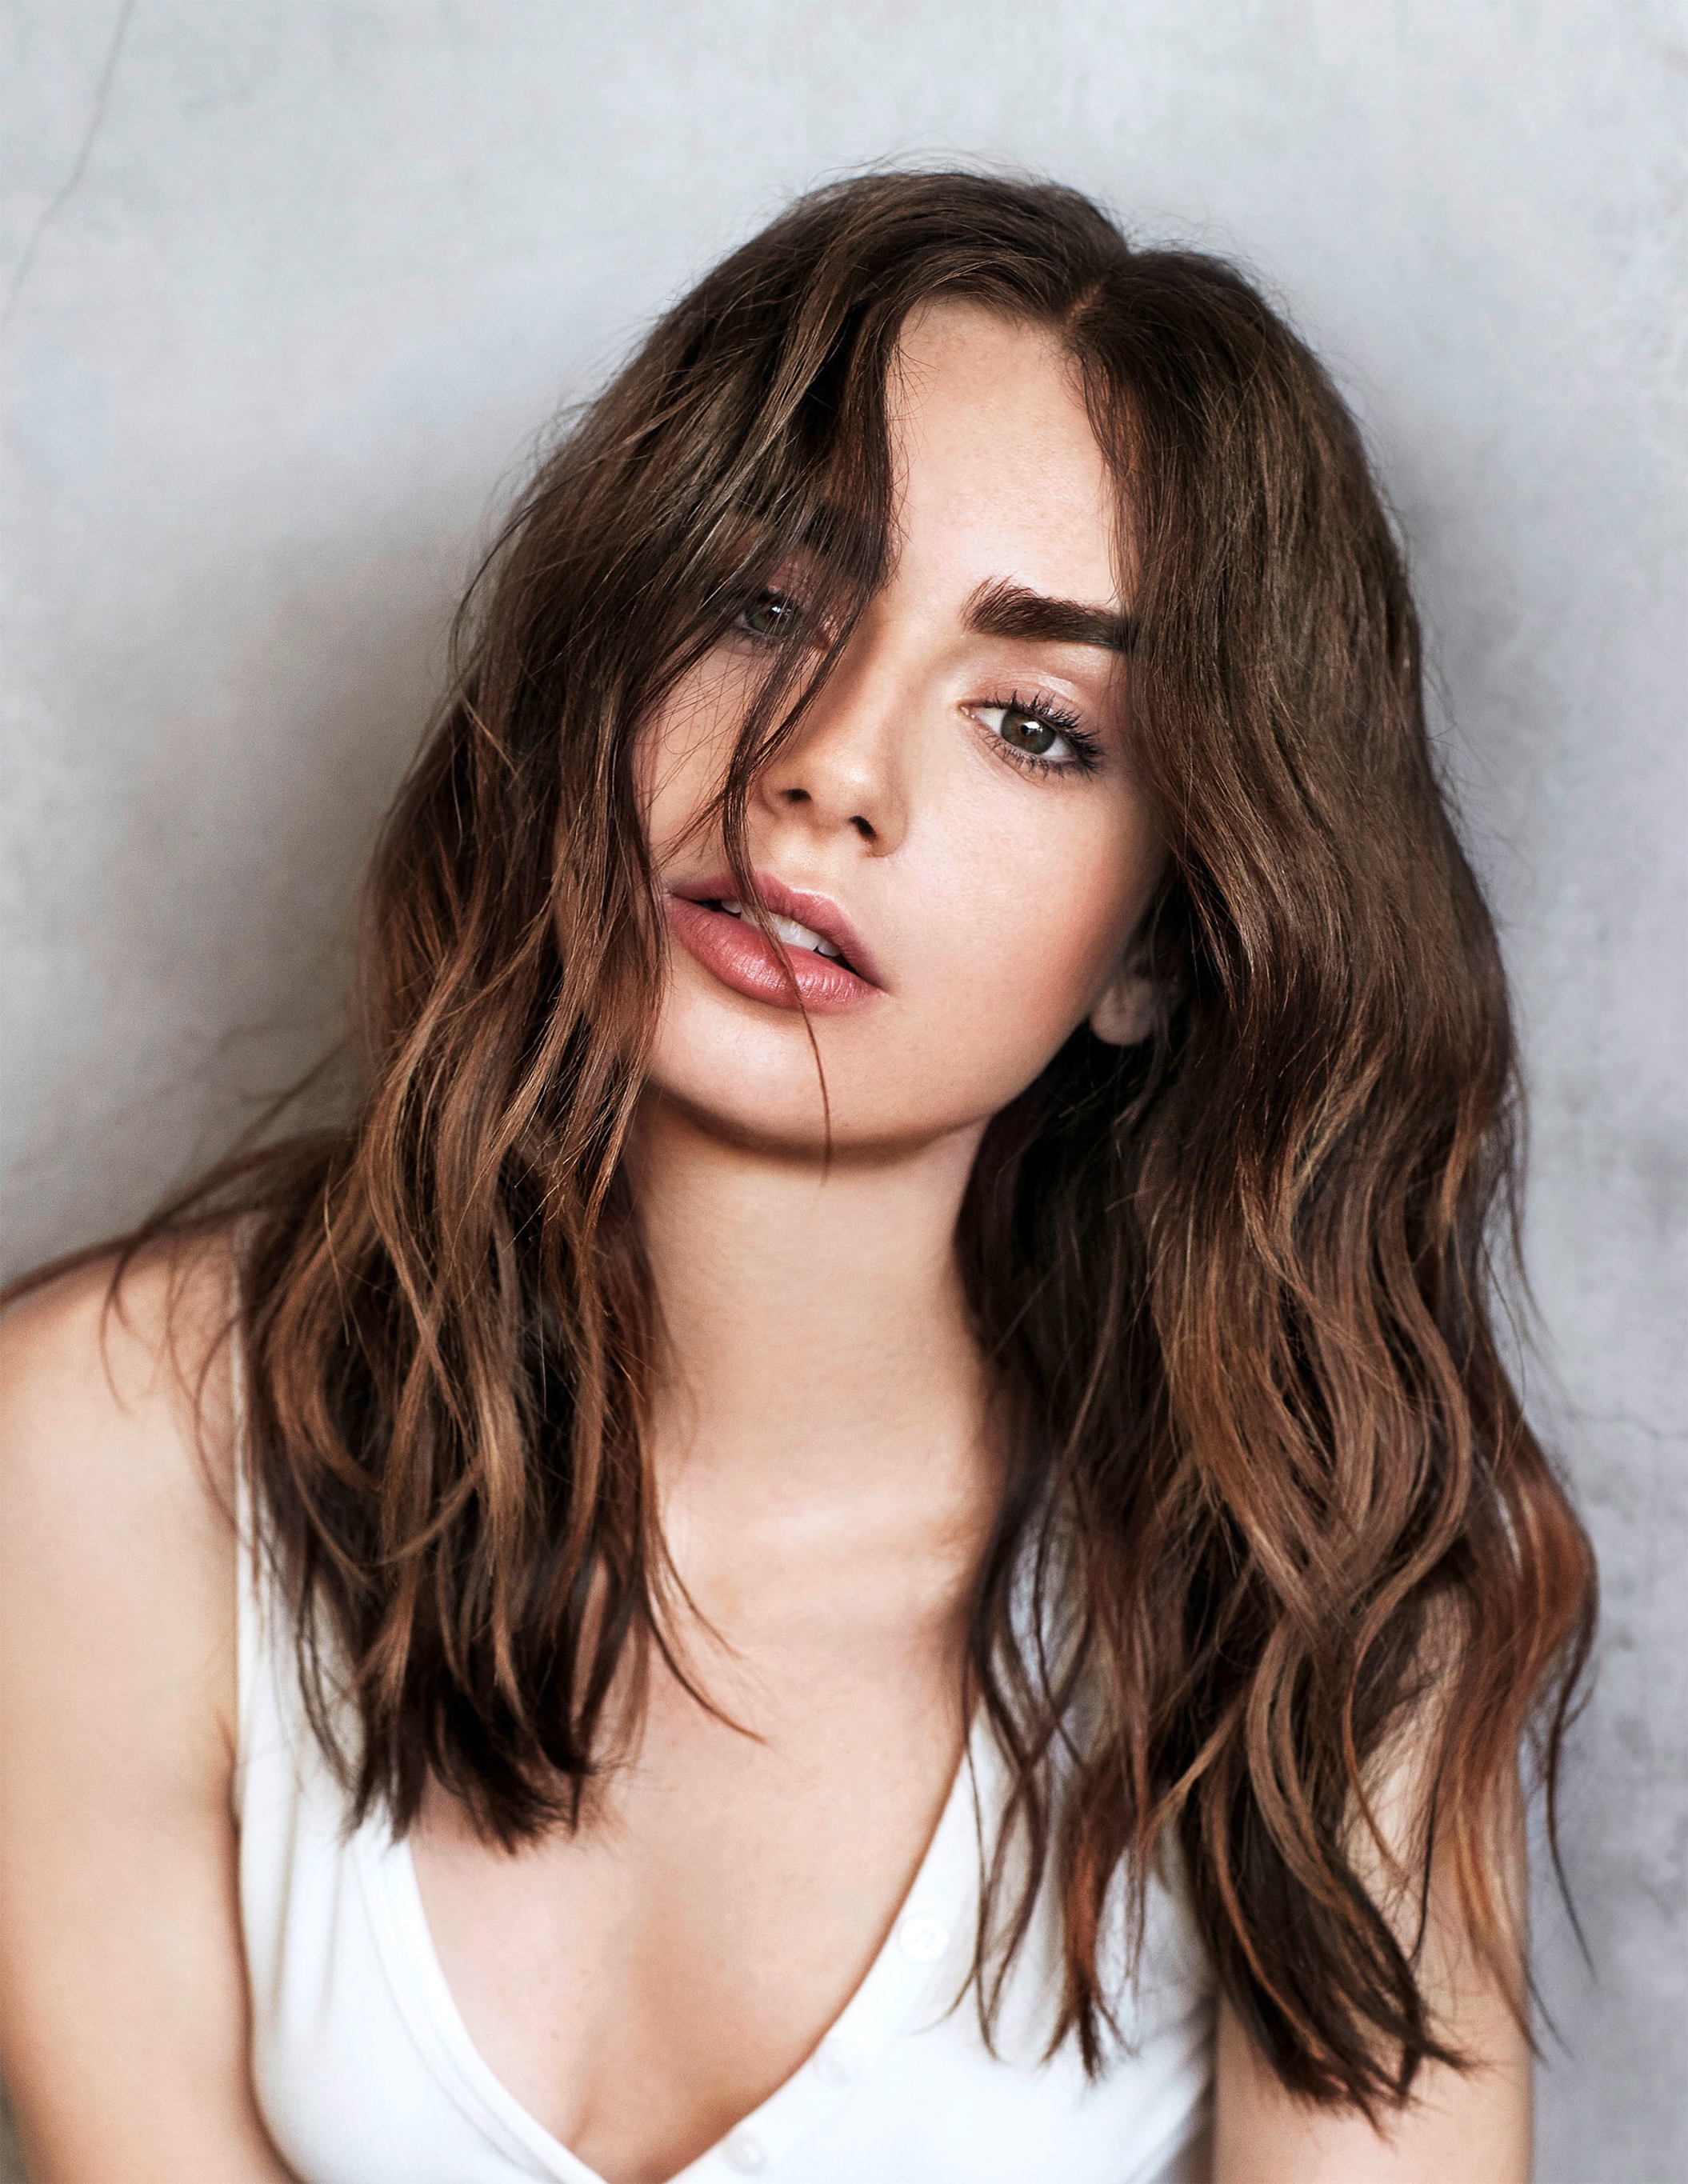 Lily Collins Women Actress Brunette Long Hair Studio Women Indoors Indoors Face Hair In Face Looking 2110x2730